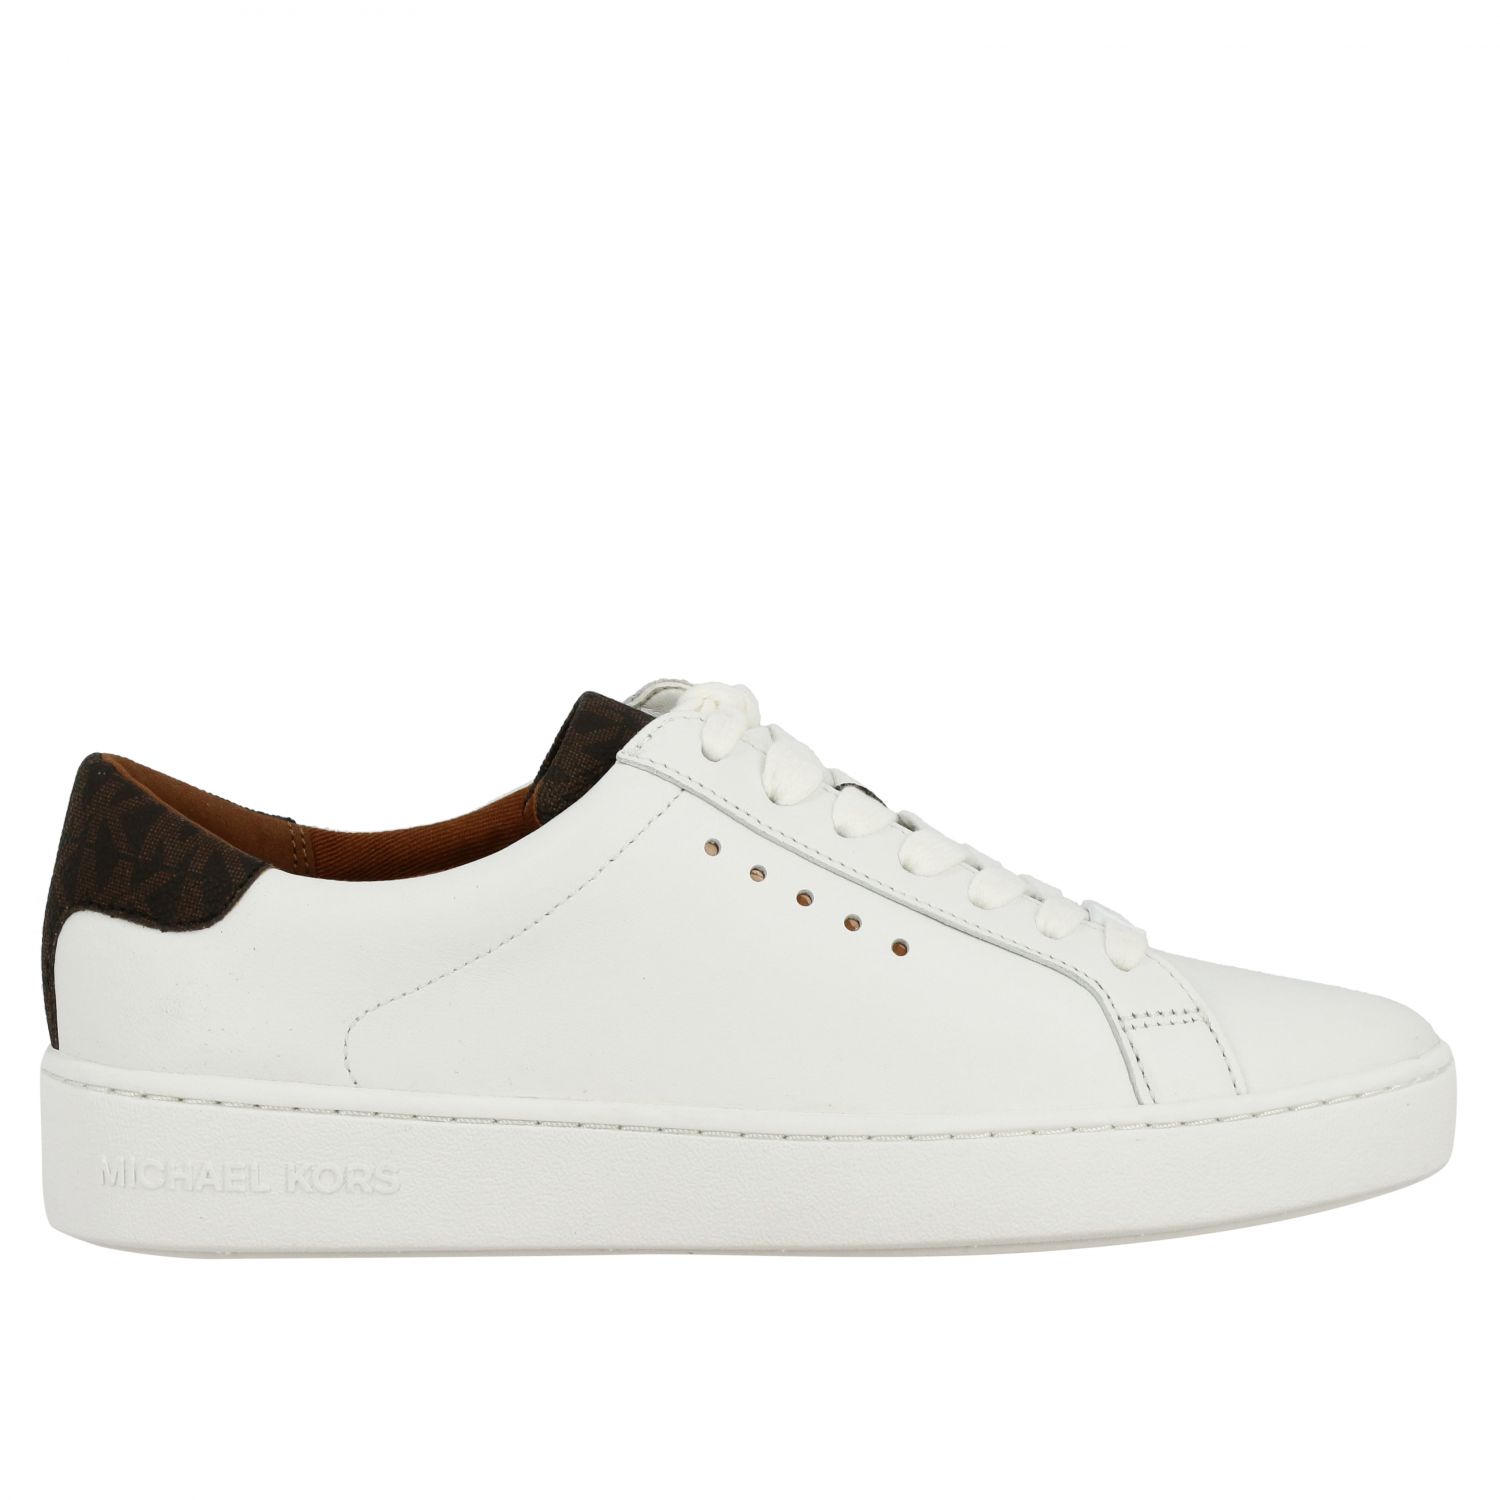 Michael Michael Kors Outlet: Lace-up sneakers in leather - White ...